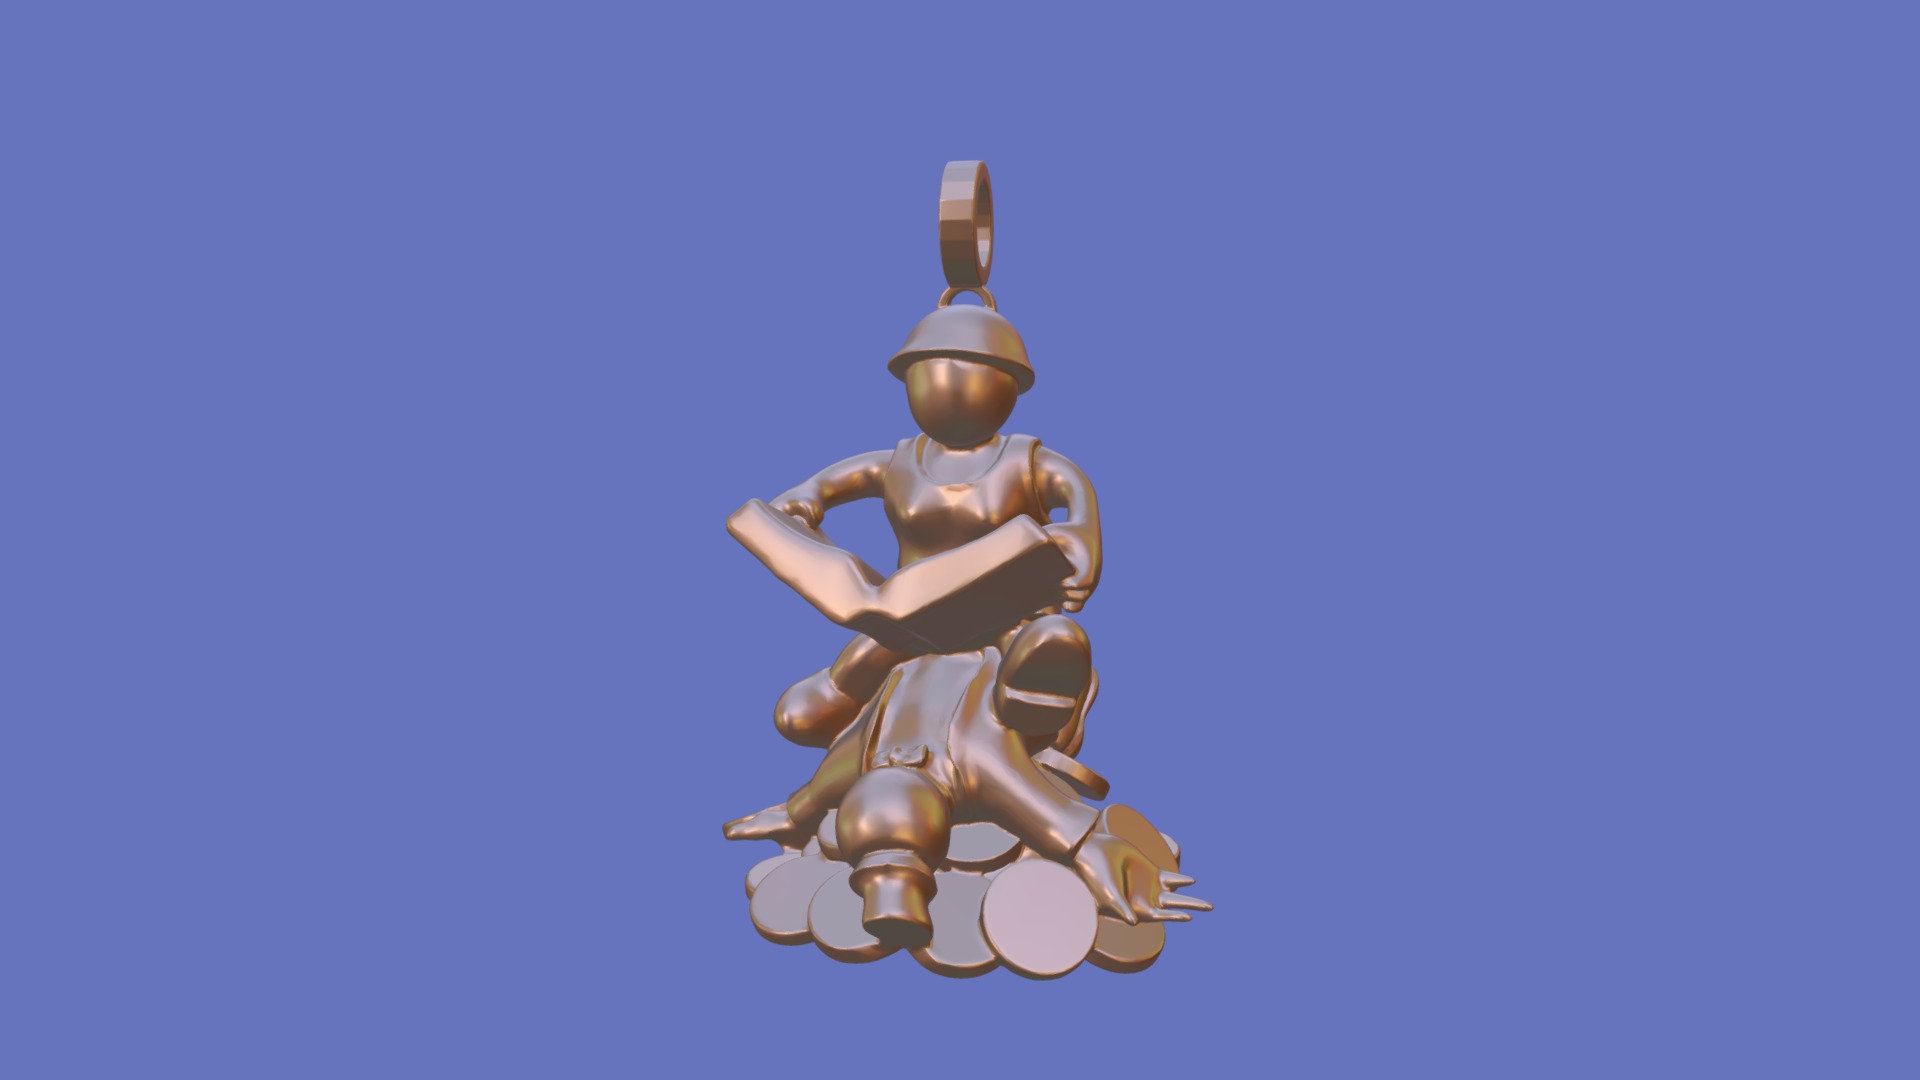 3D model Underground NYC - This is a 3D model of the Underground NYC. The 3D model is about a small statue of a person.